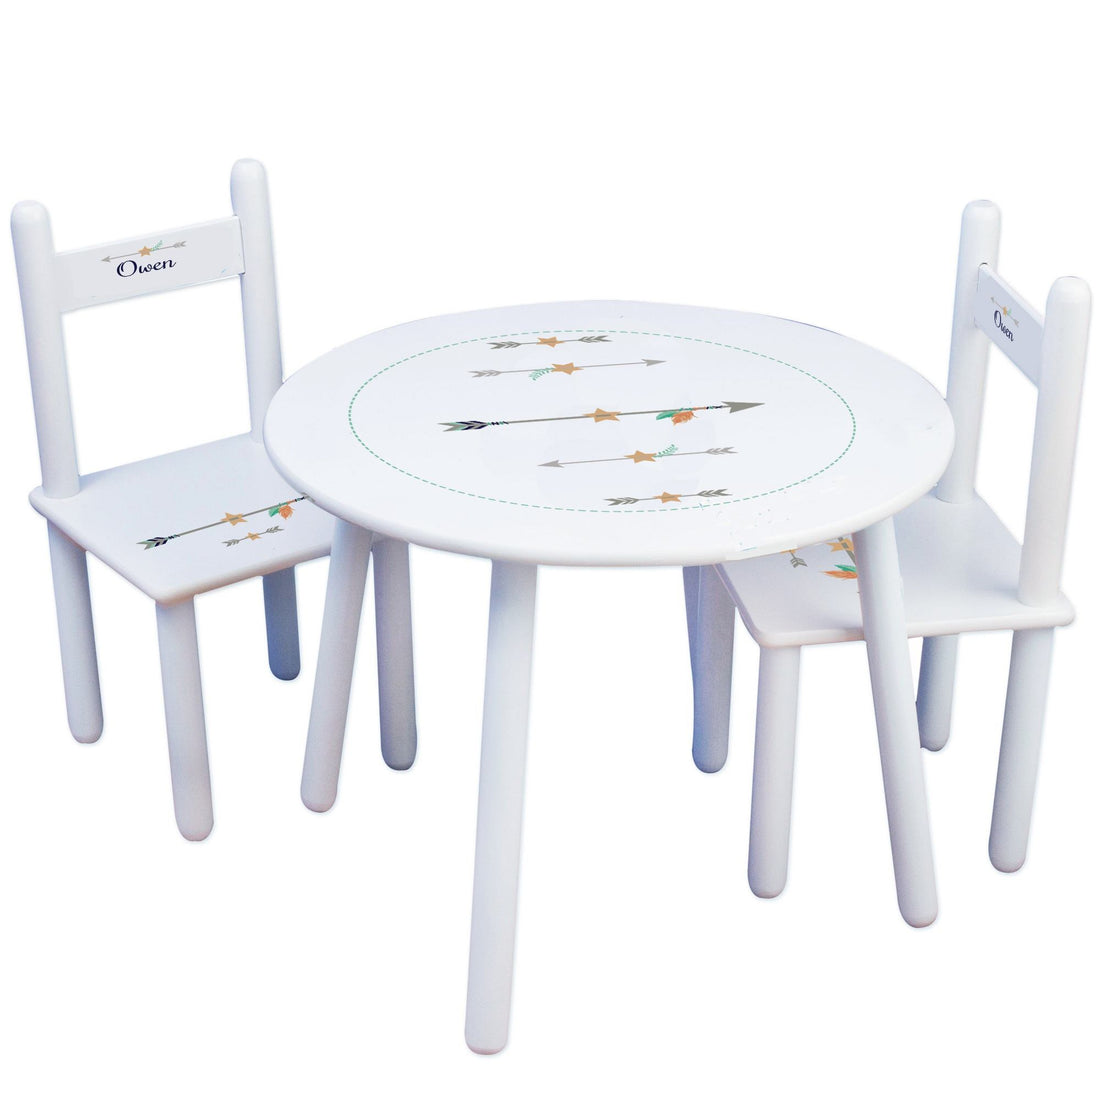 Personalized Table and Chairs with Tribal Arrows Boy design